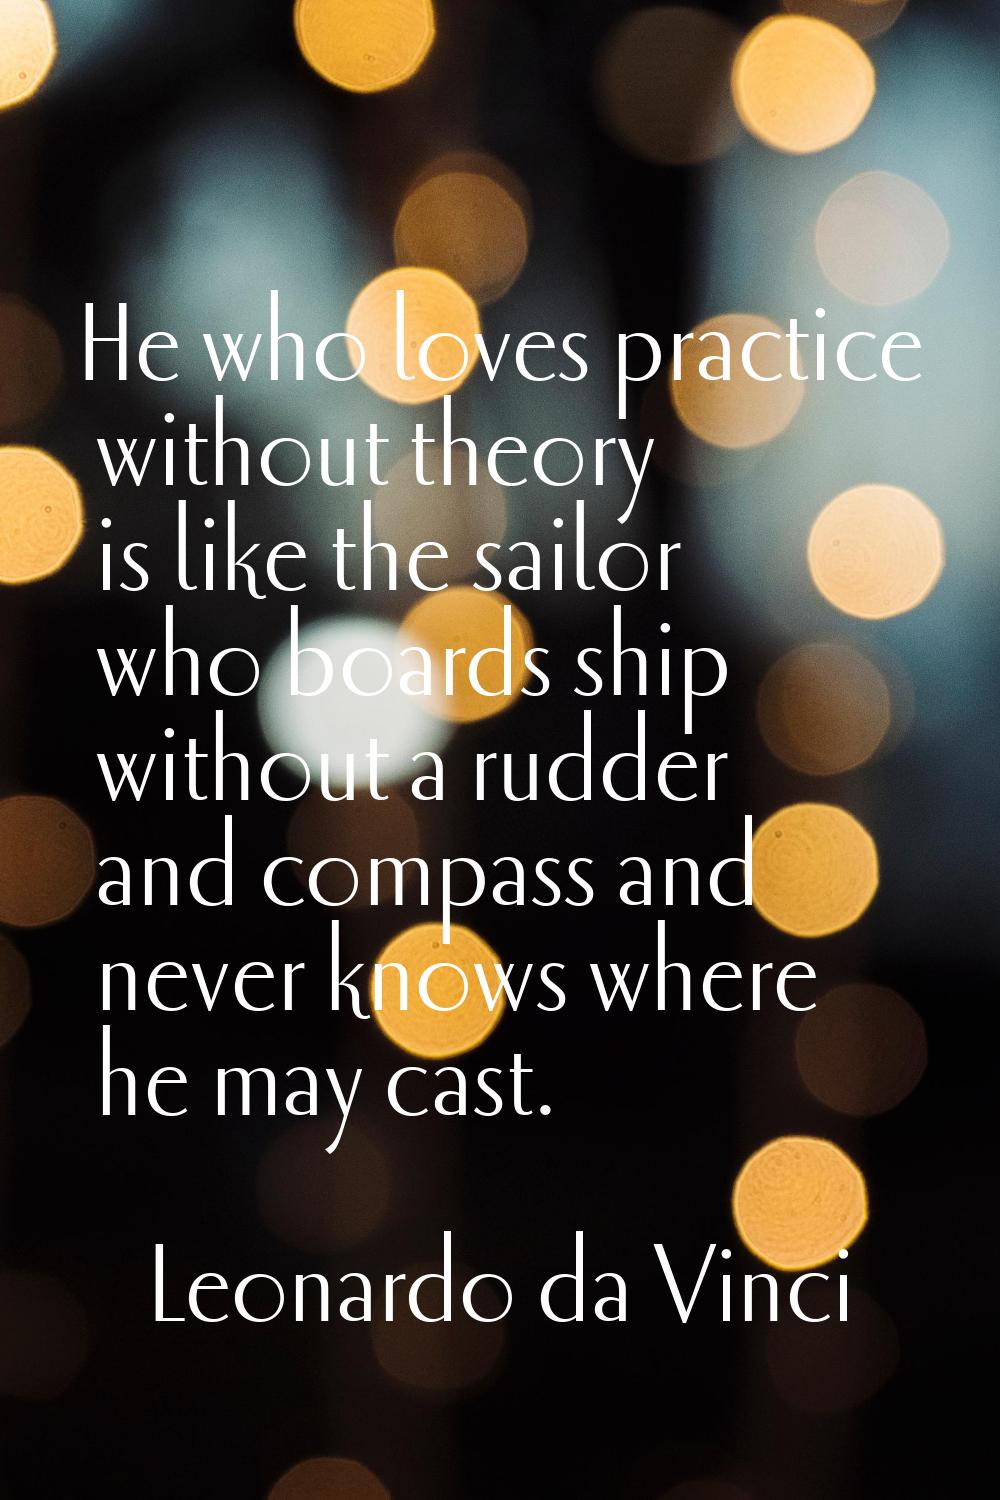 He who loves practice without theory is like the sailor who boards ship without a rudder and compas